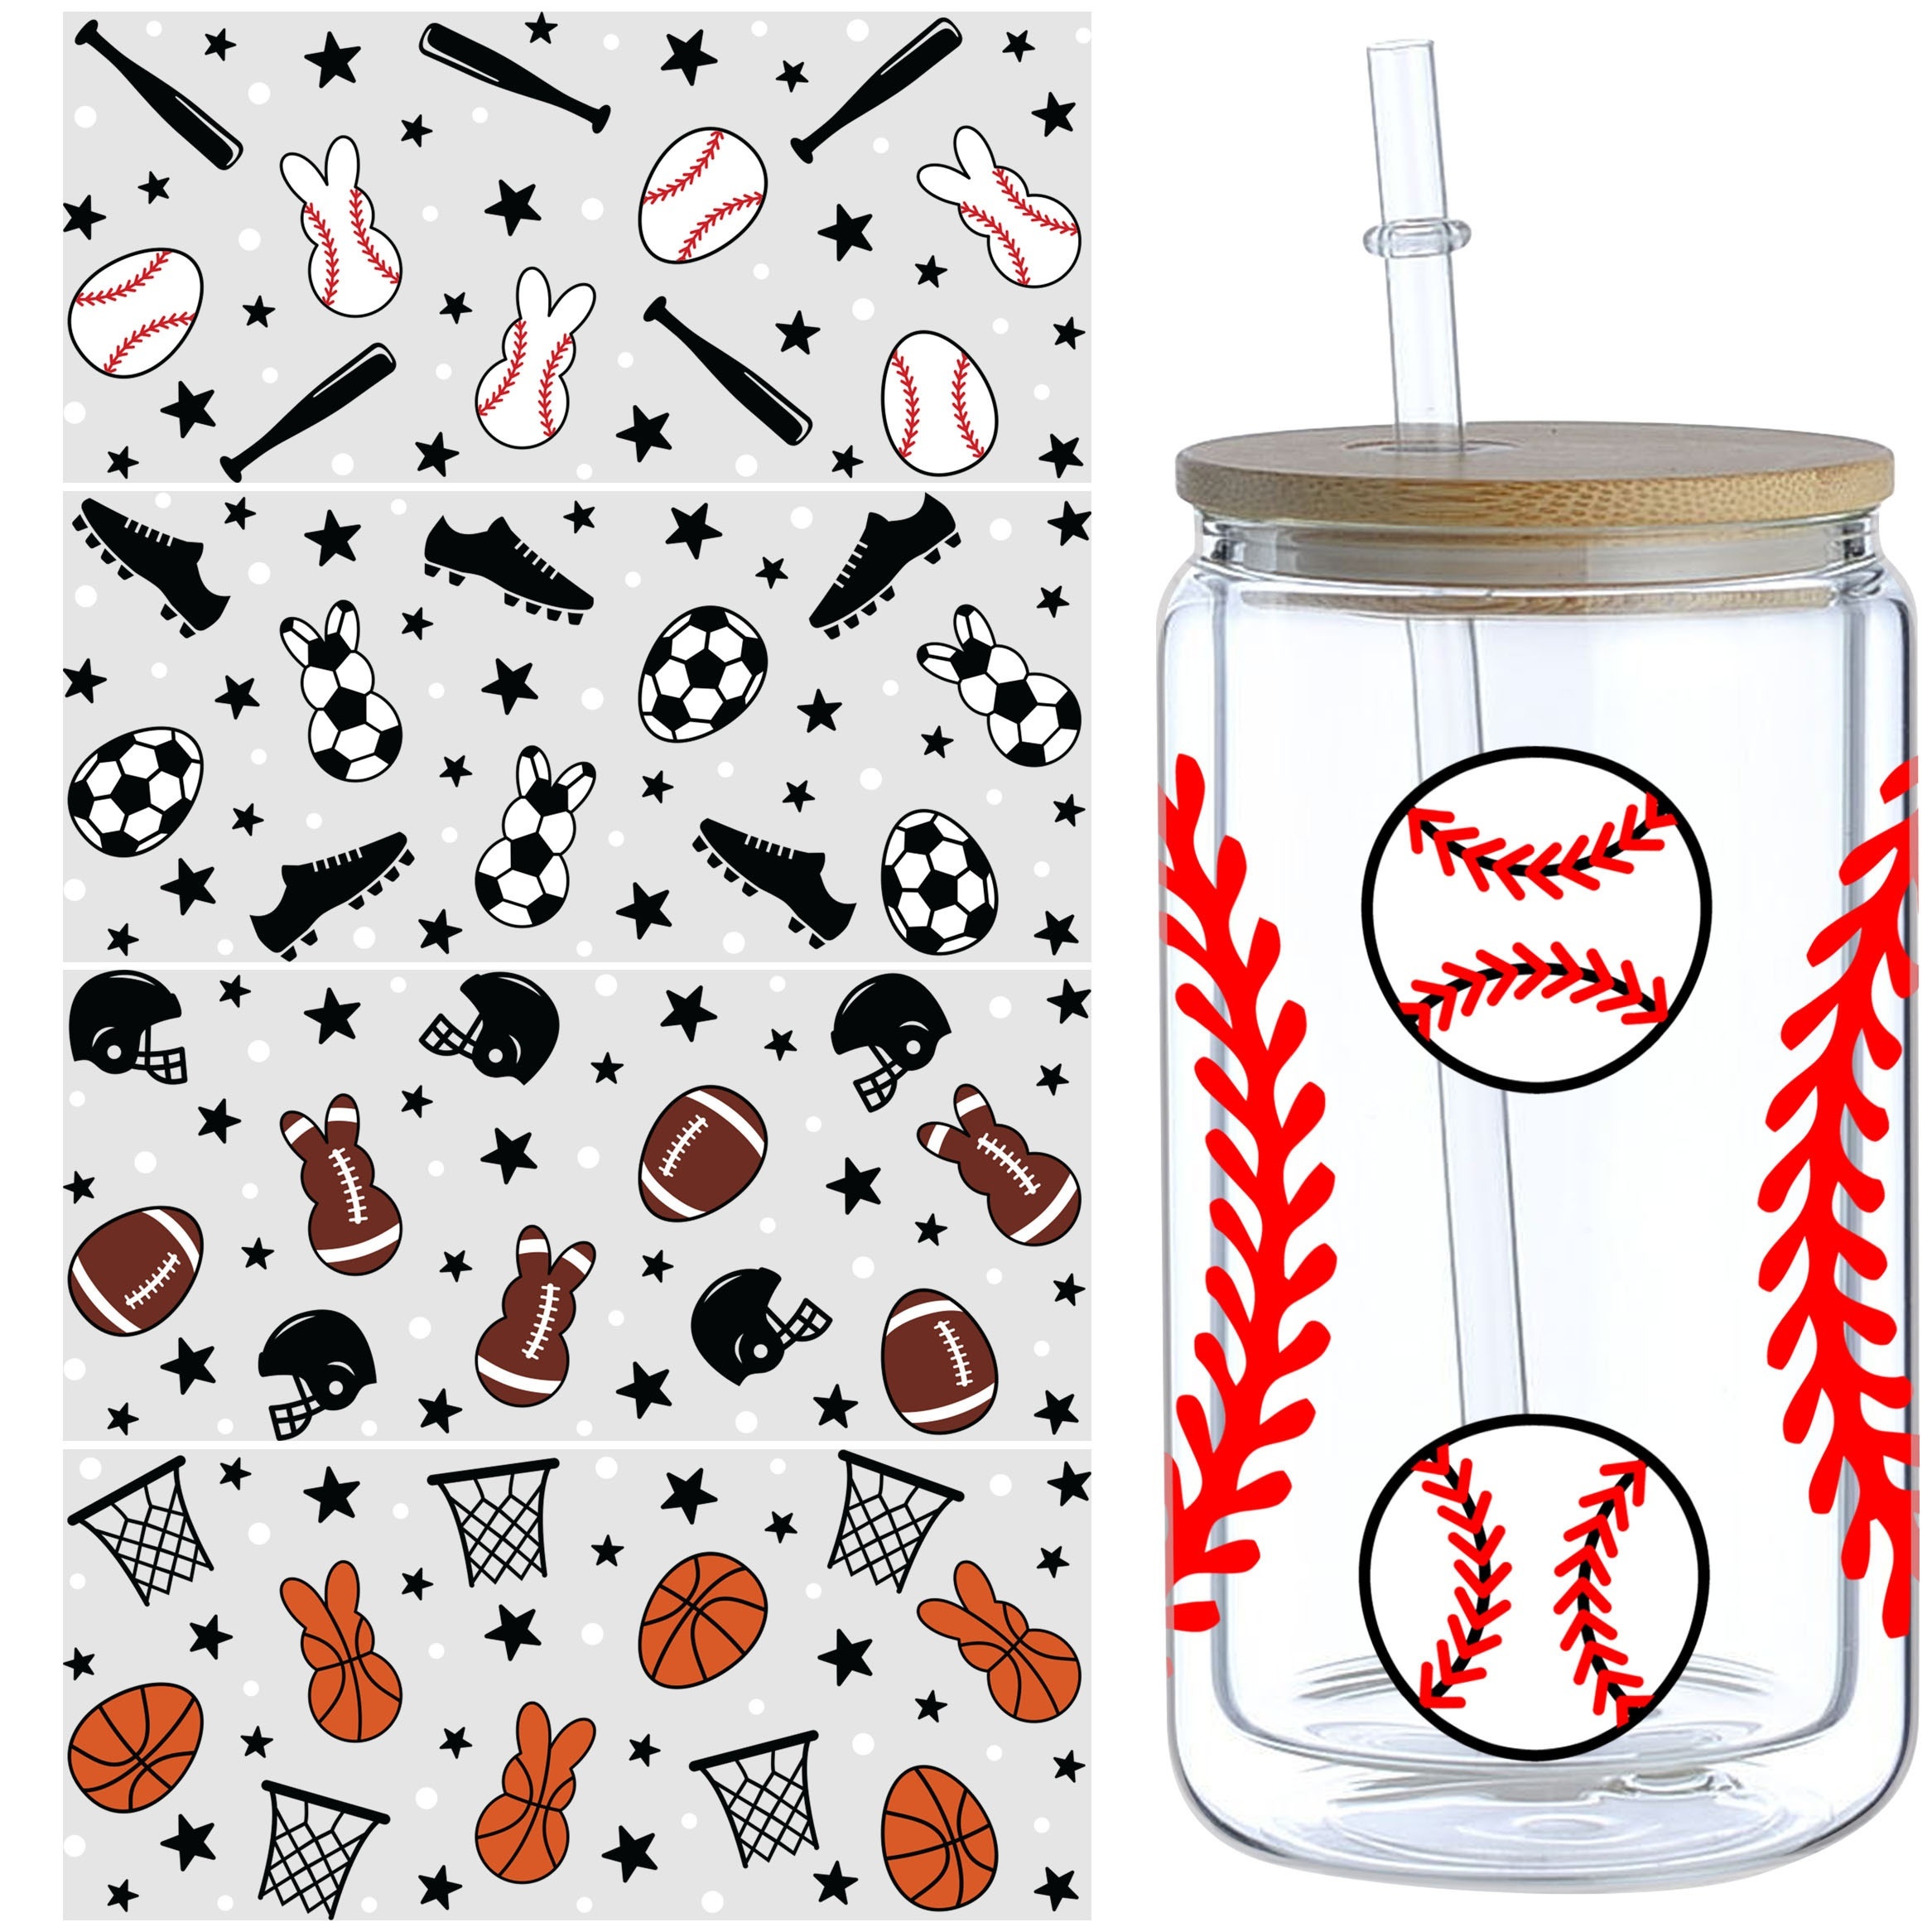 5pcs UV DTF Cup Wrap, Football Transfer Stickers For Glass Cups, UV DTF  Transfer Waterproof Sticker For 16OZ Libbey Glass Cups